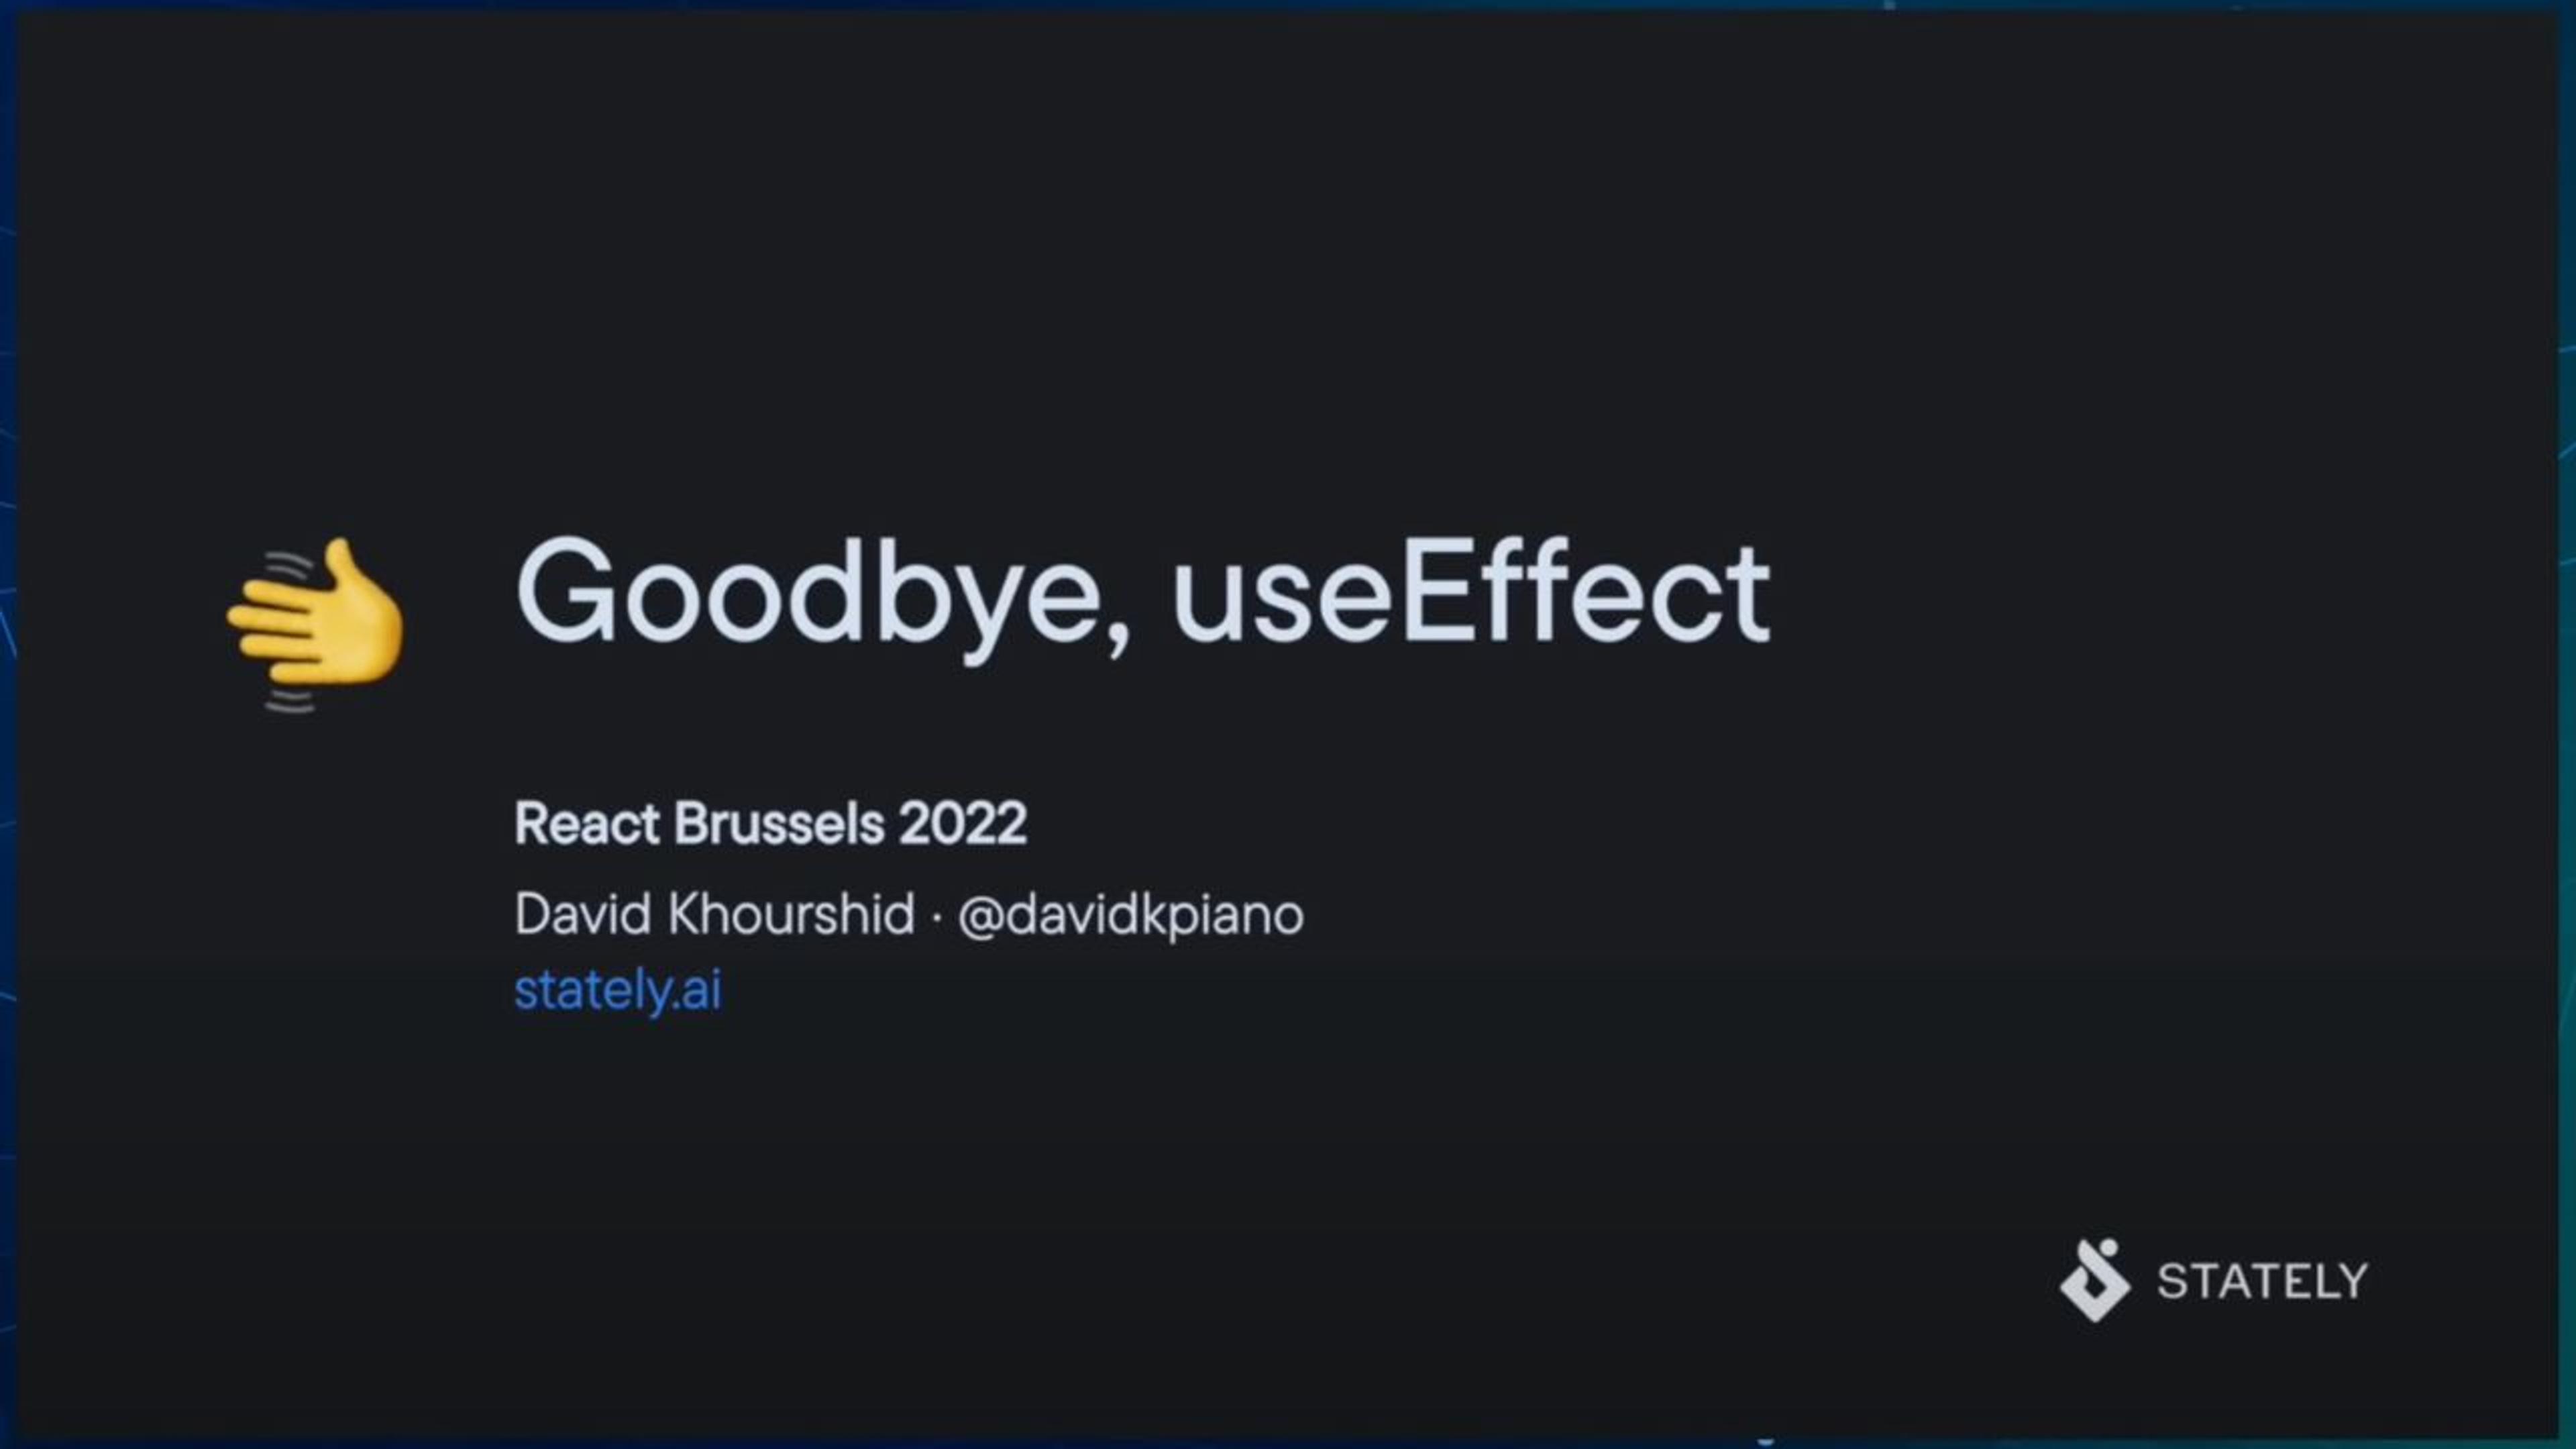 Goodbye, useEffect by David Khourshid at the React Brussels 2022 event